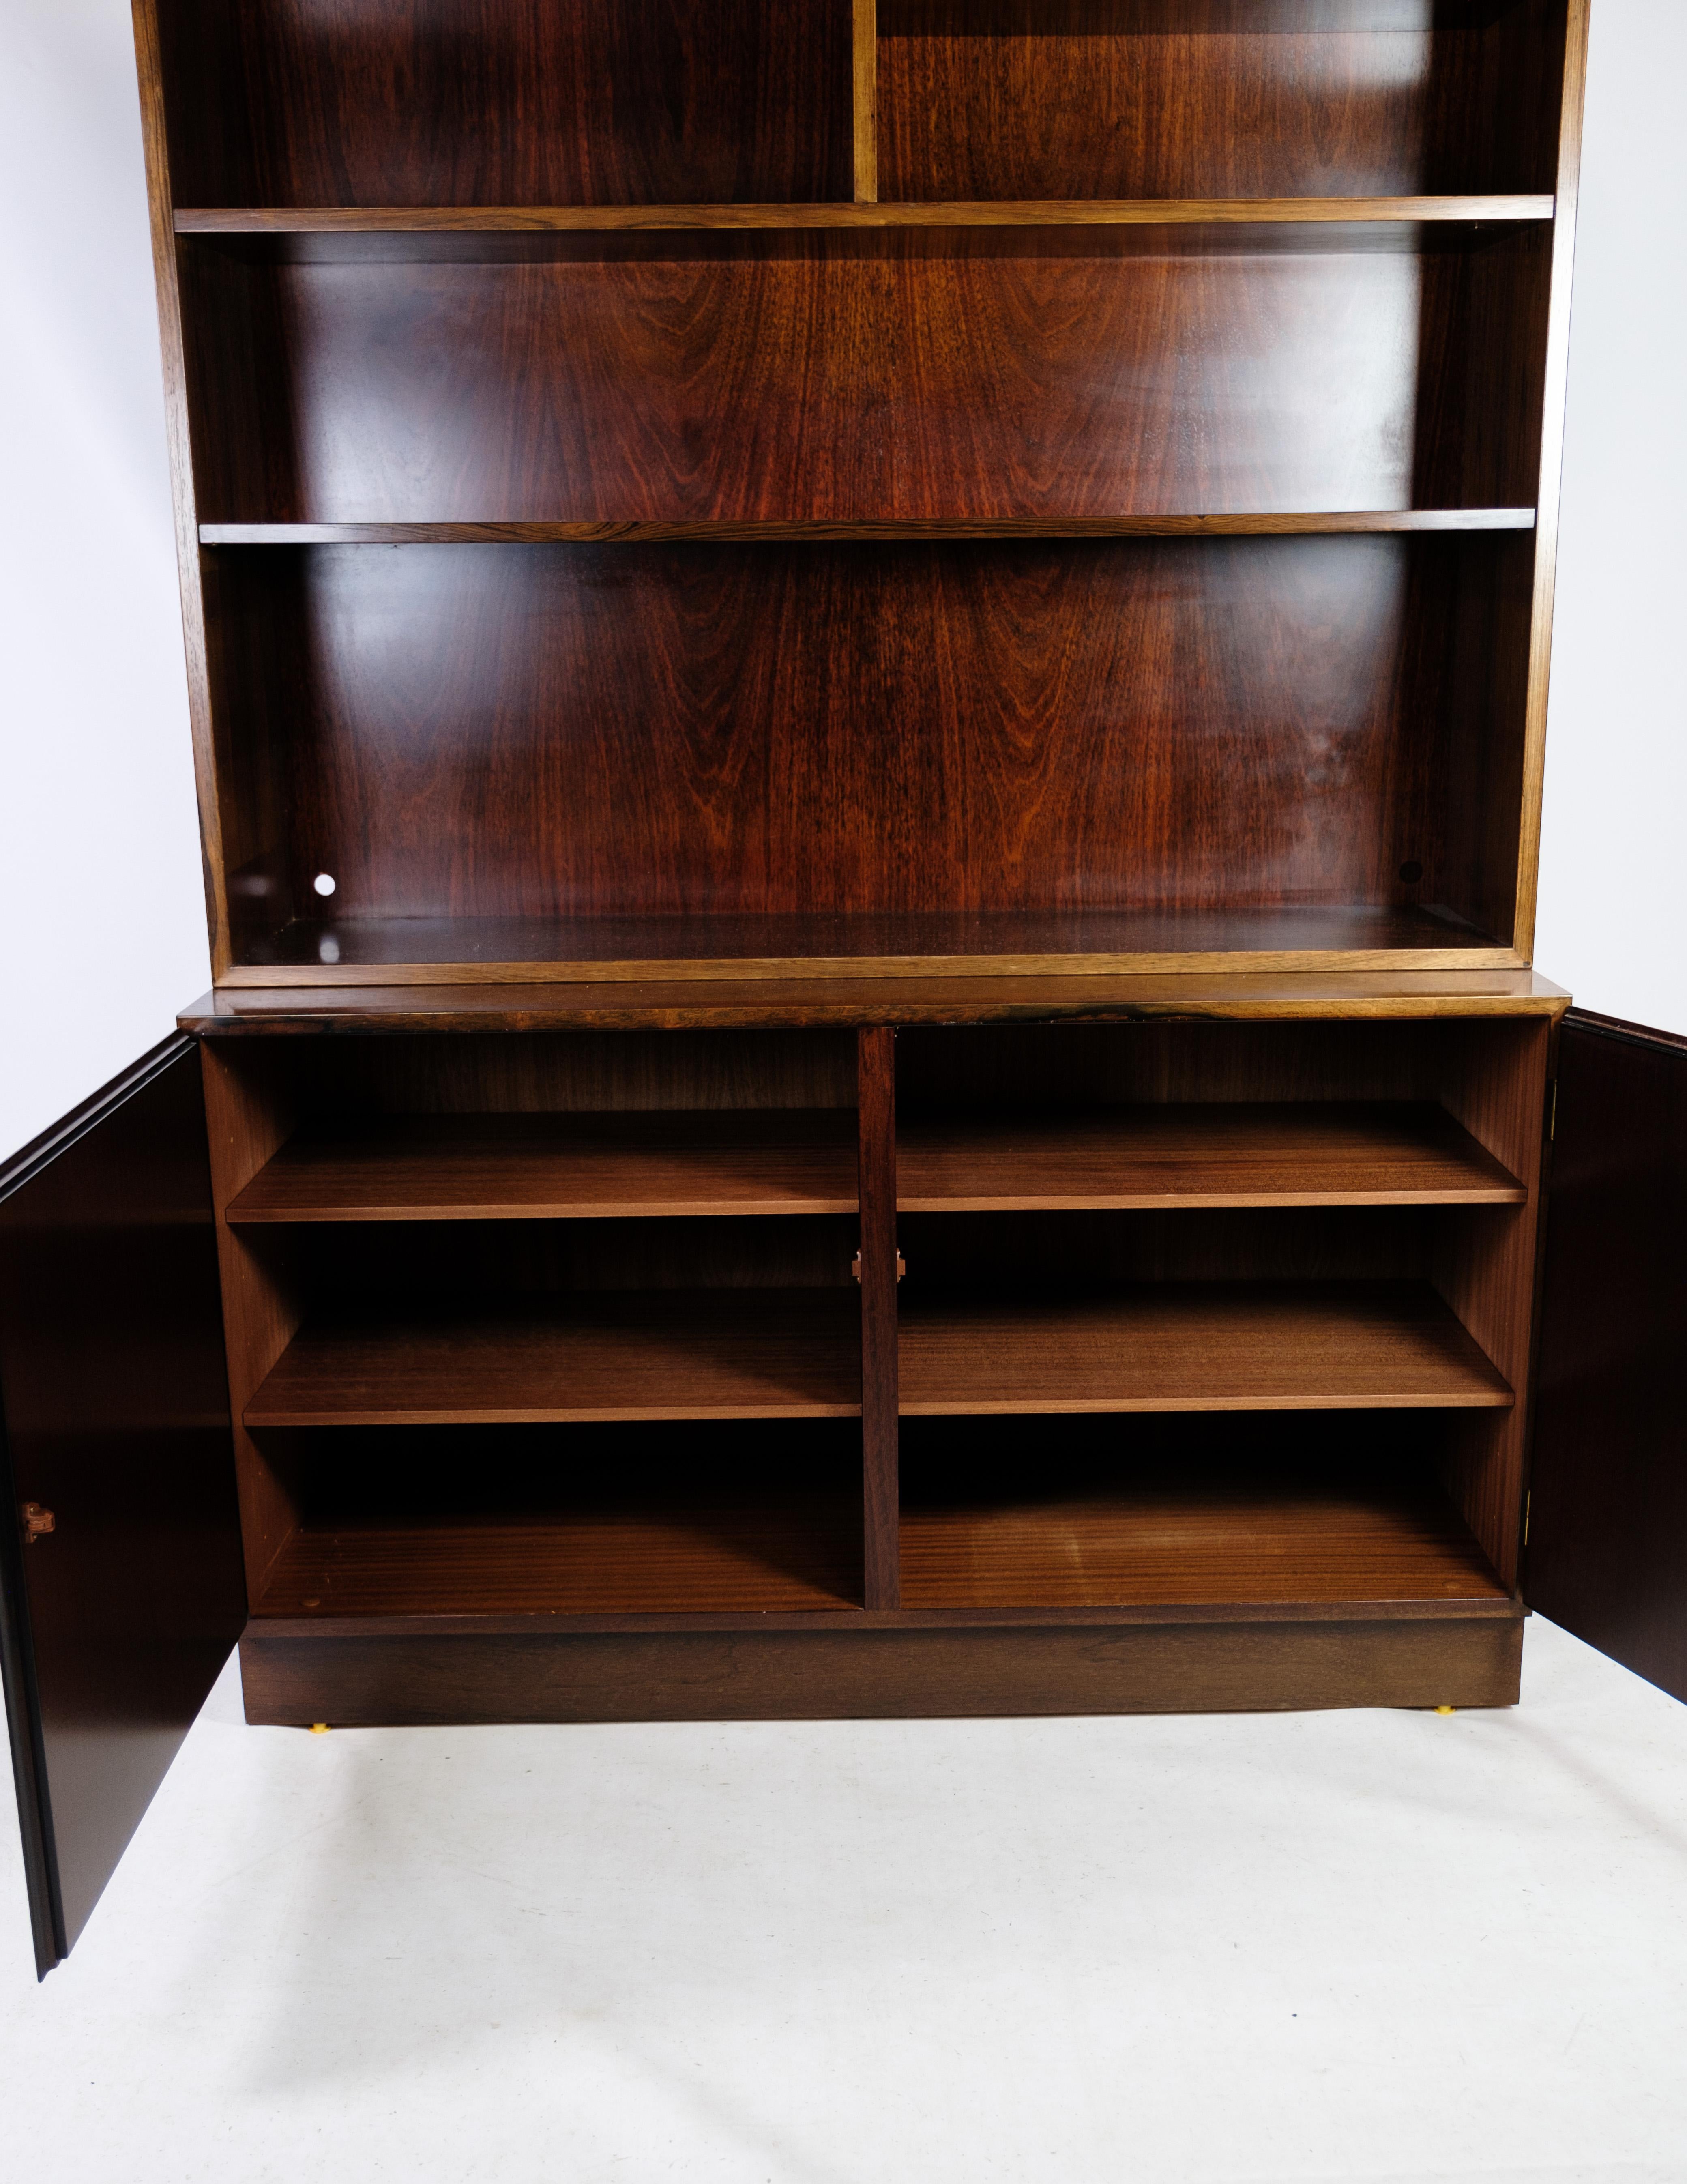 The Model 9 shelving system with secretary, crafted from luxurious rosewood, is a prime example of Danish design from the 1960s. Manufactured by Omann Junior's Møbelfabrik, this piece combines functionality with timeless elegance, showcasing the